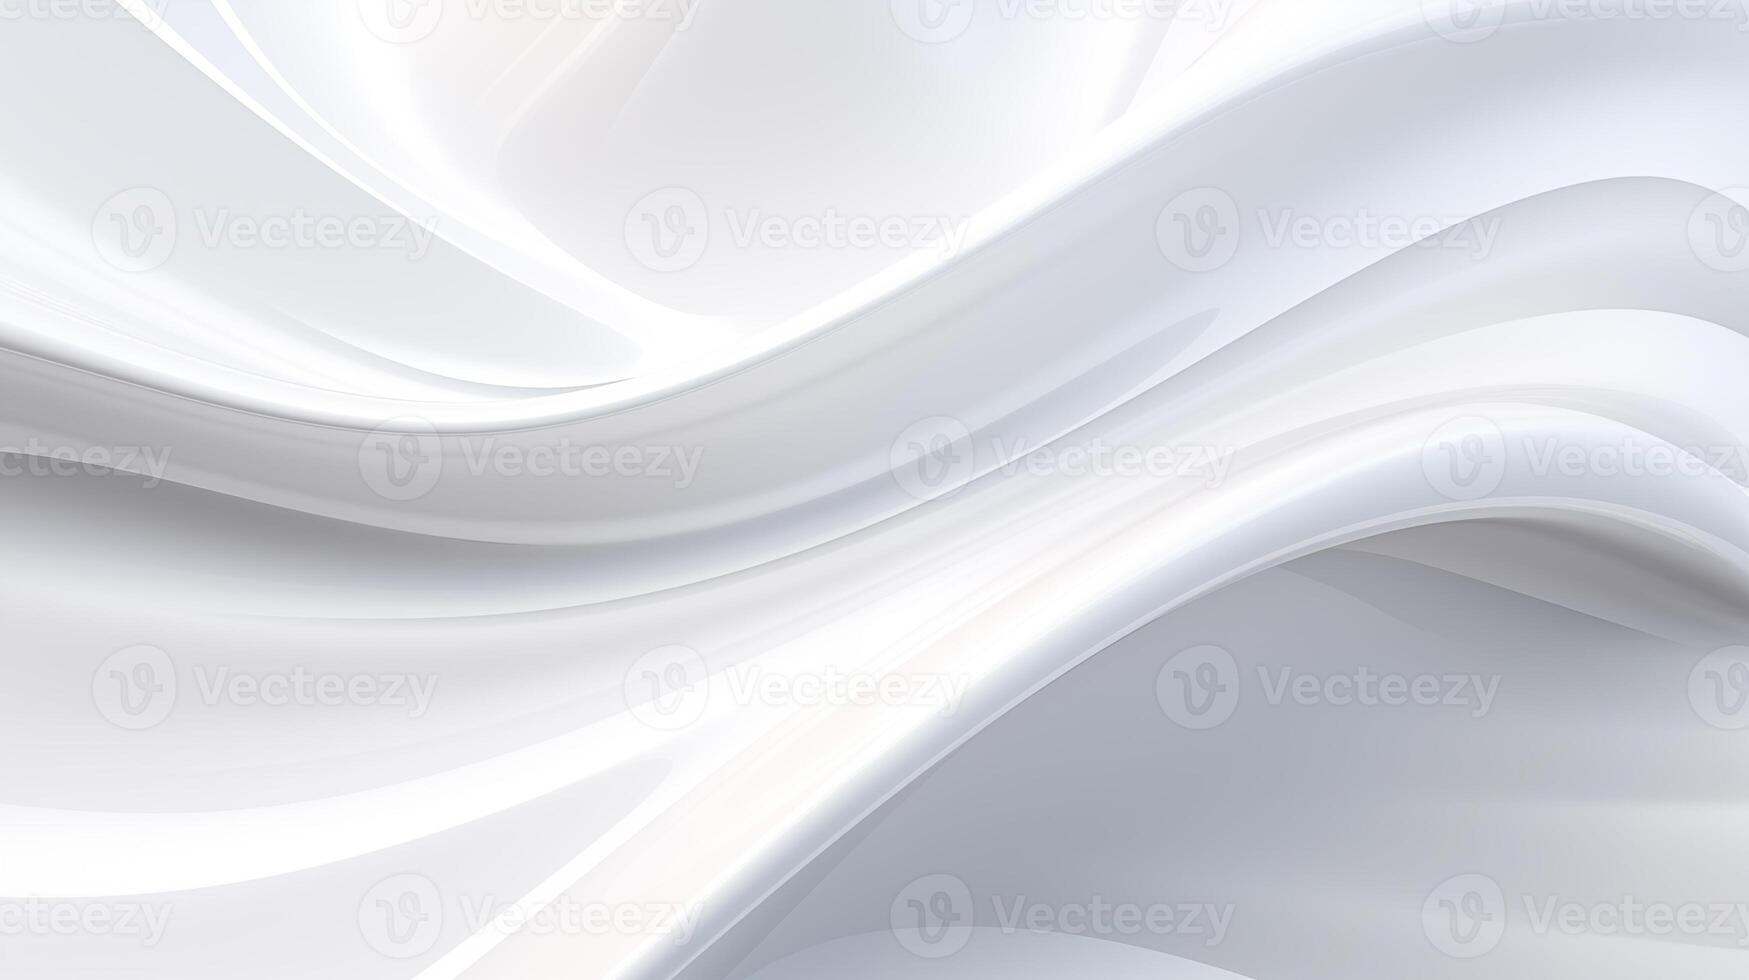 Abstract soft shiny white gray wavy line background graphic design. Elegant white gray modern architecture art. Blurred backdrop effect back photo